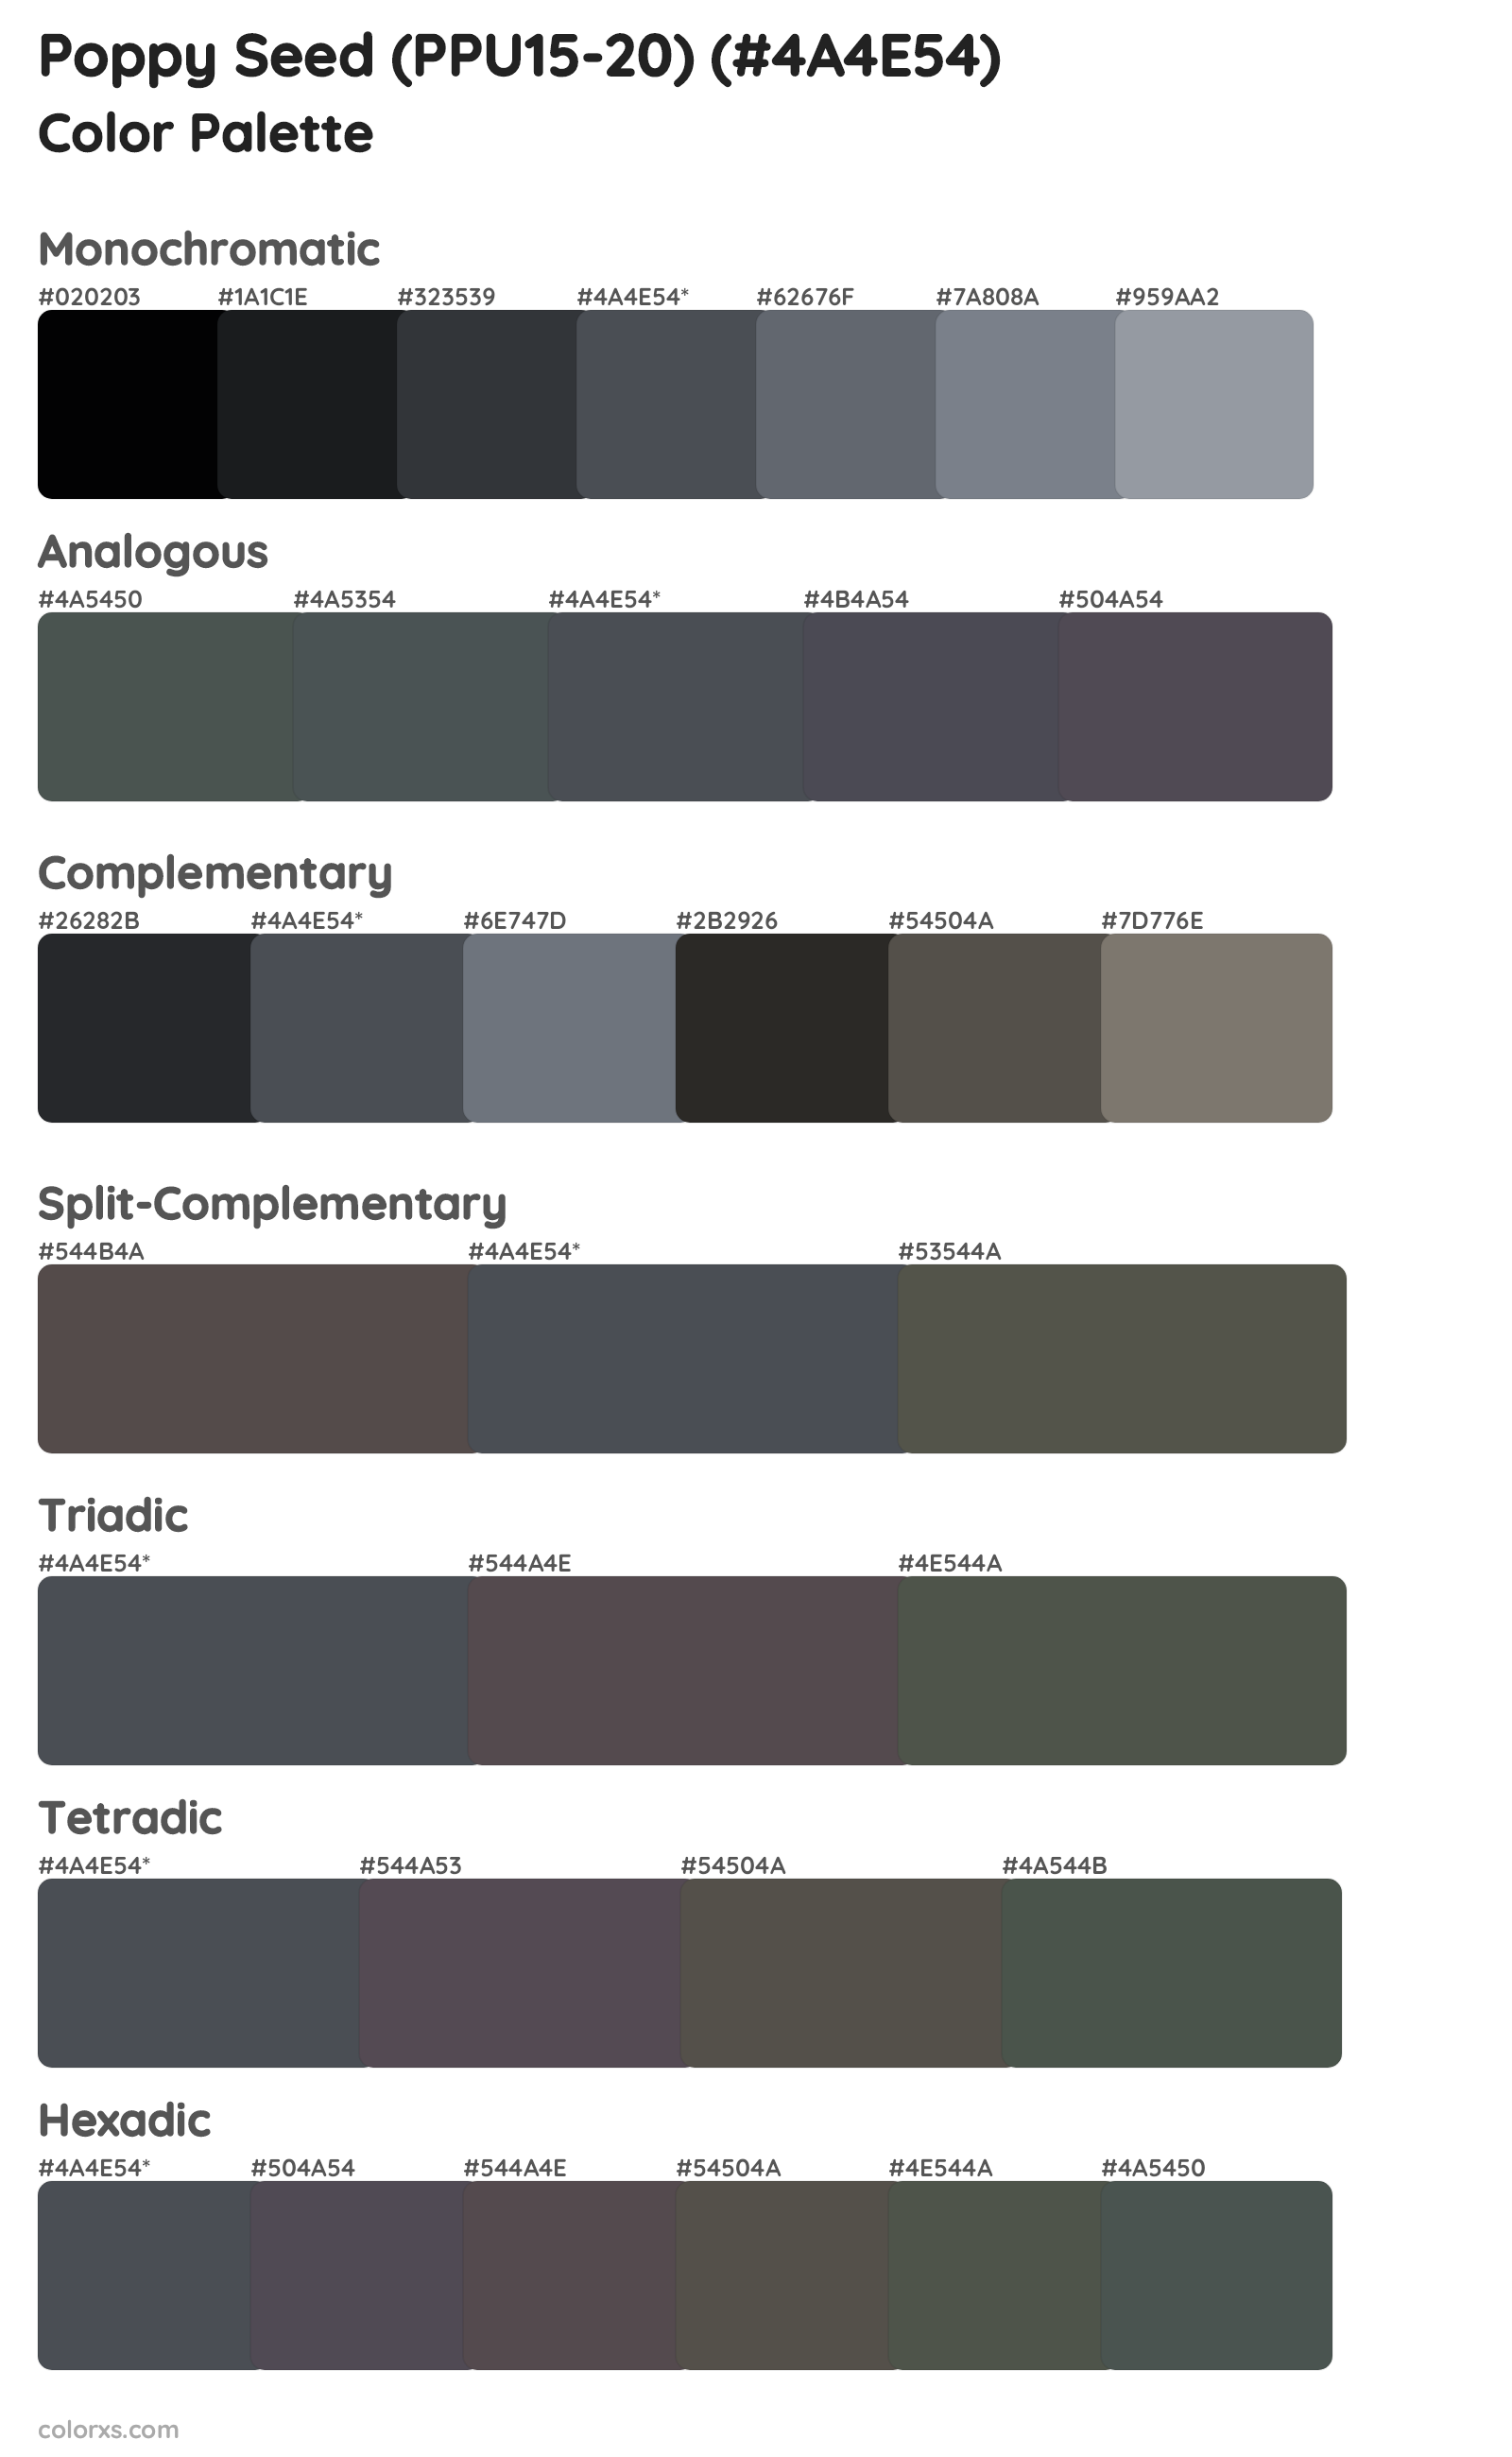 Poppy Seed (PPU15-20) Color Scheme Palettes